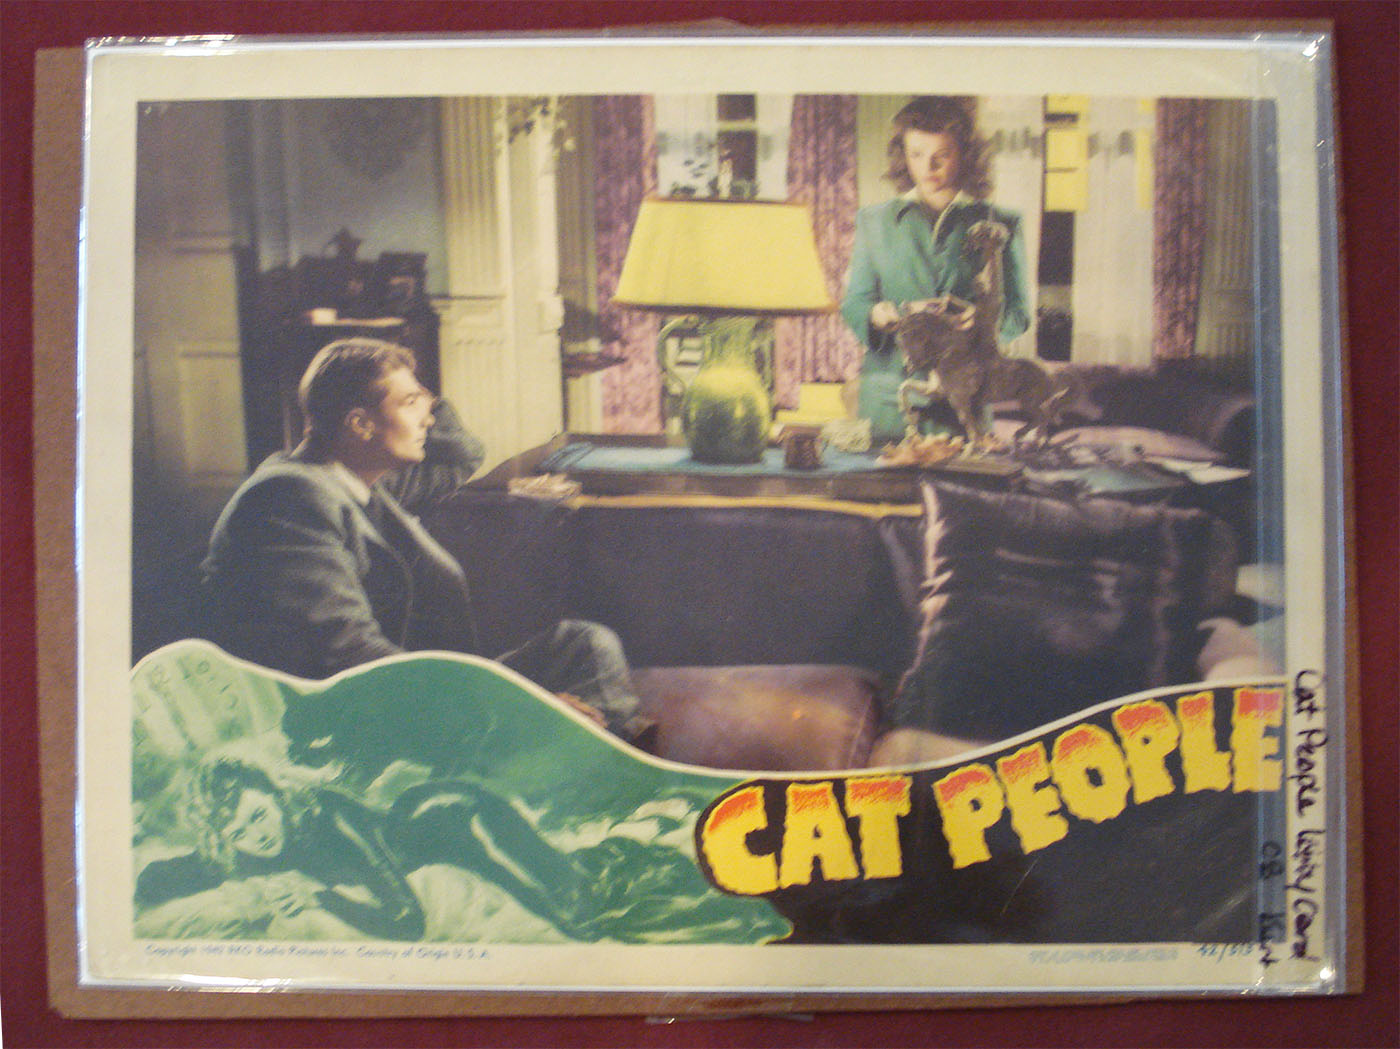 Cat People (1942) Original Lobby Card (Fine to Very Fine) Jacques Tourneur, Simone Simon, Tom Conway